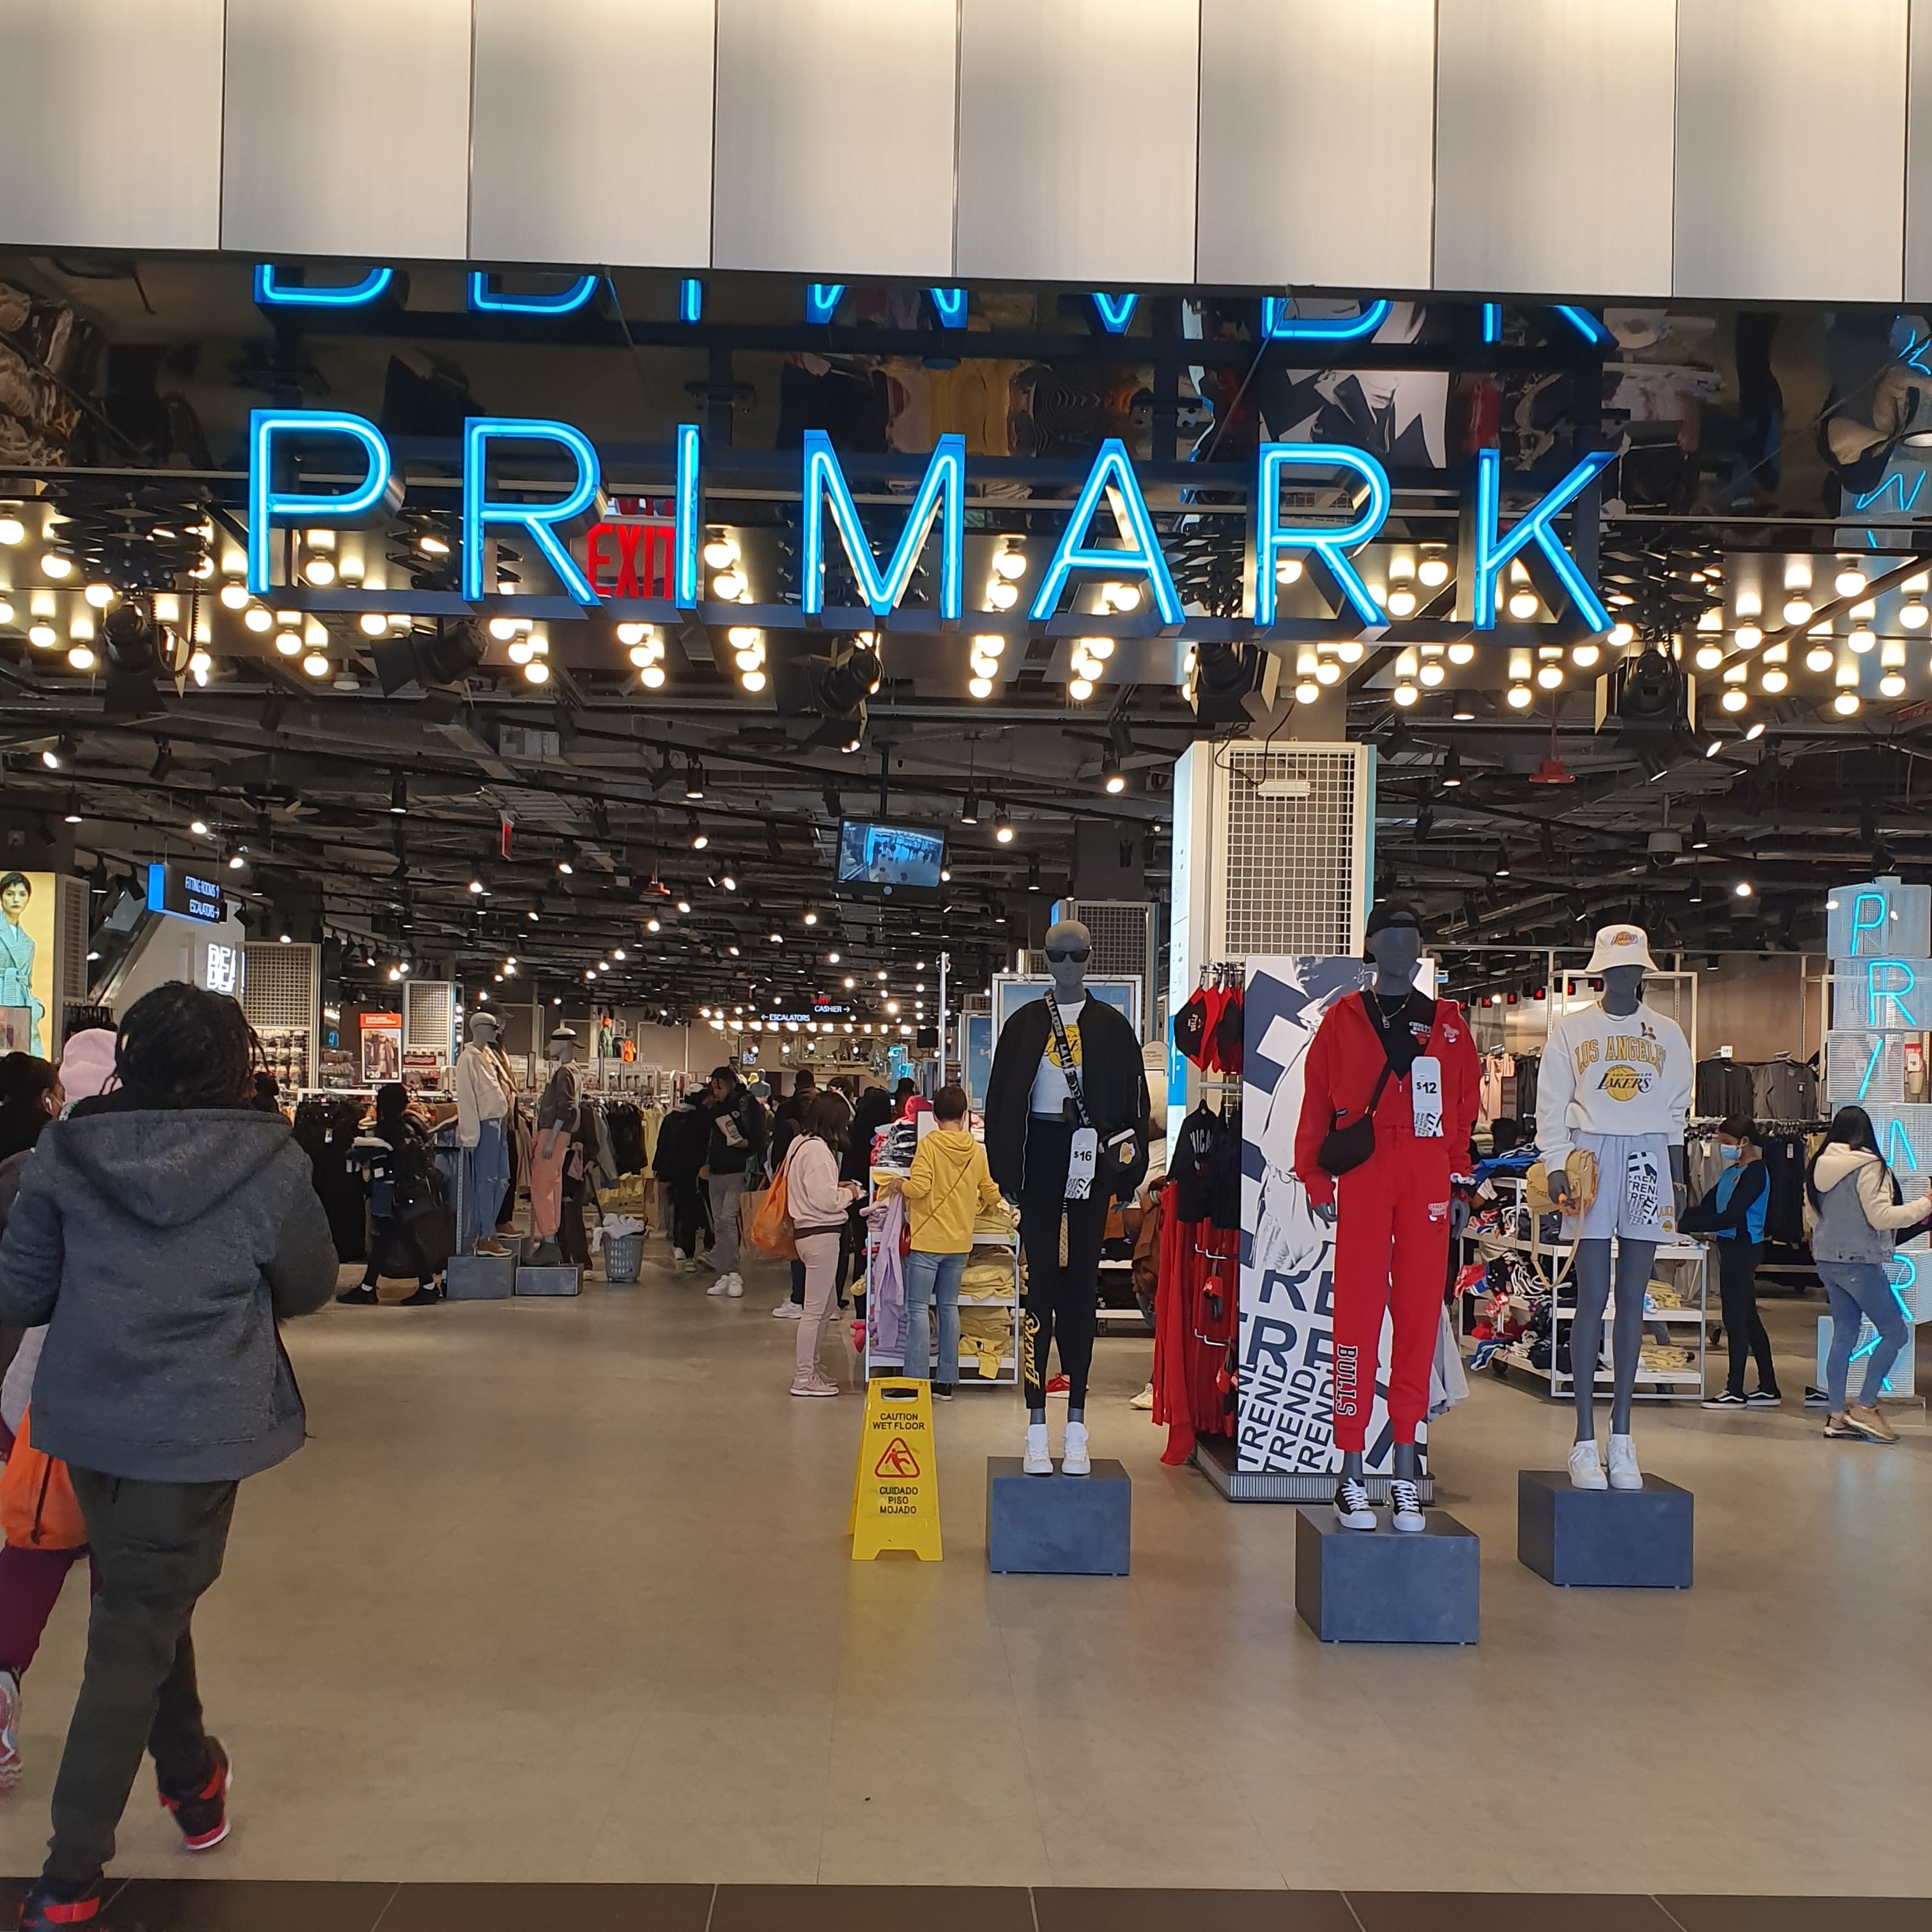 Have You Seen The Primark NBA Collaboration?